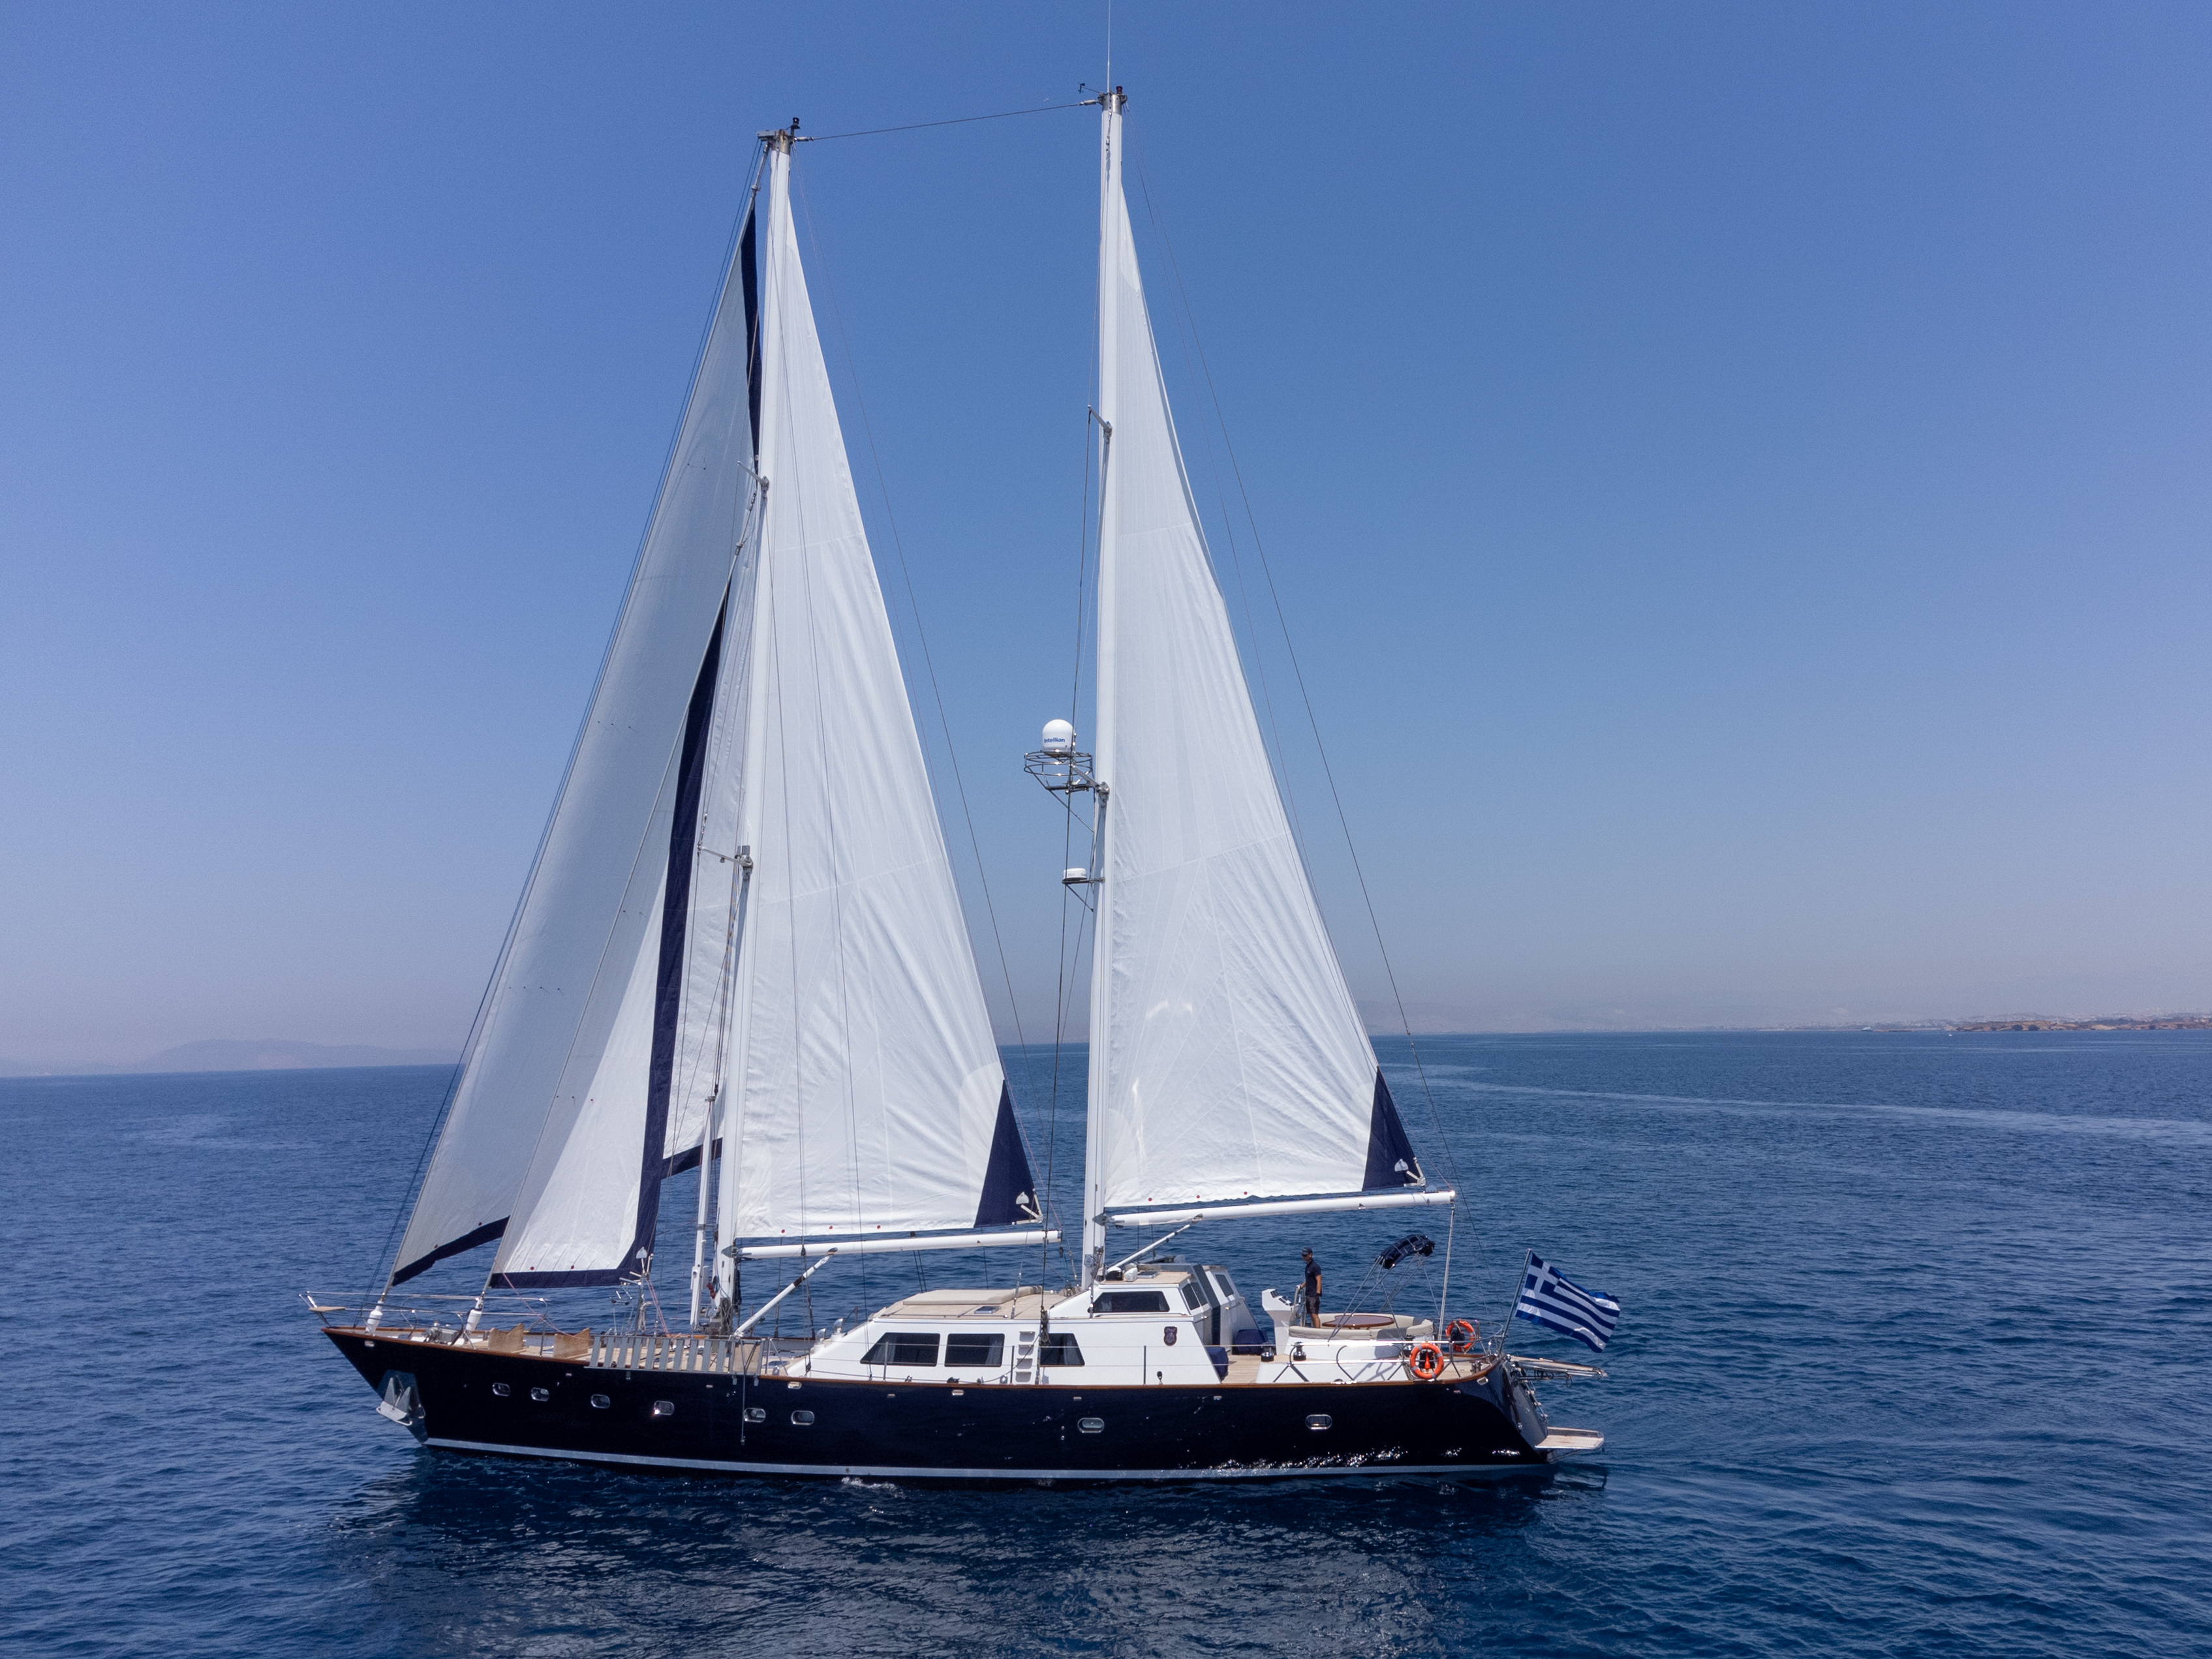 CCYD 85 - Superyacht charter worldwide & Boat hire in Greece Athens and Saronic Gulf Athens Piraeus Marina Zea 5